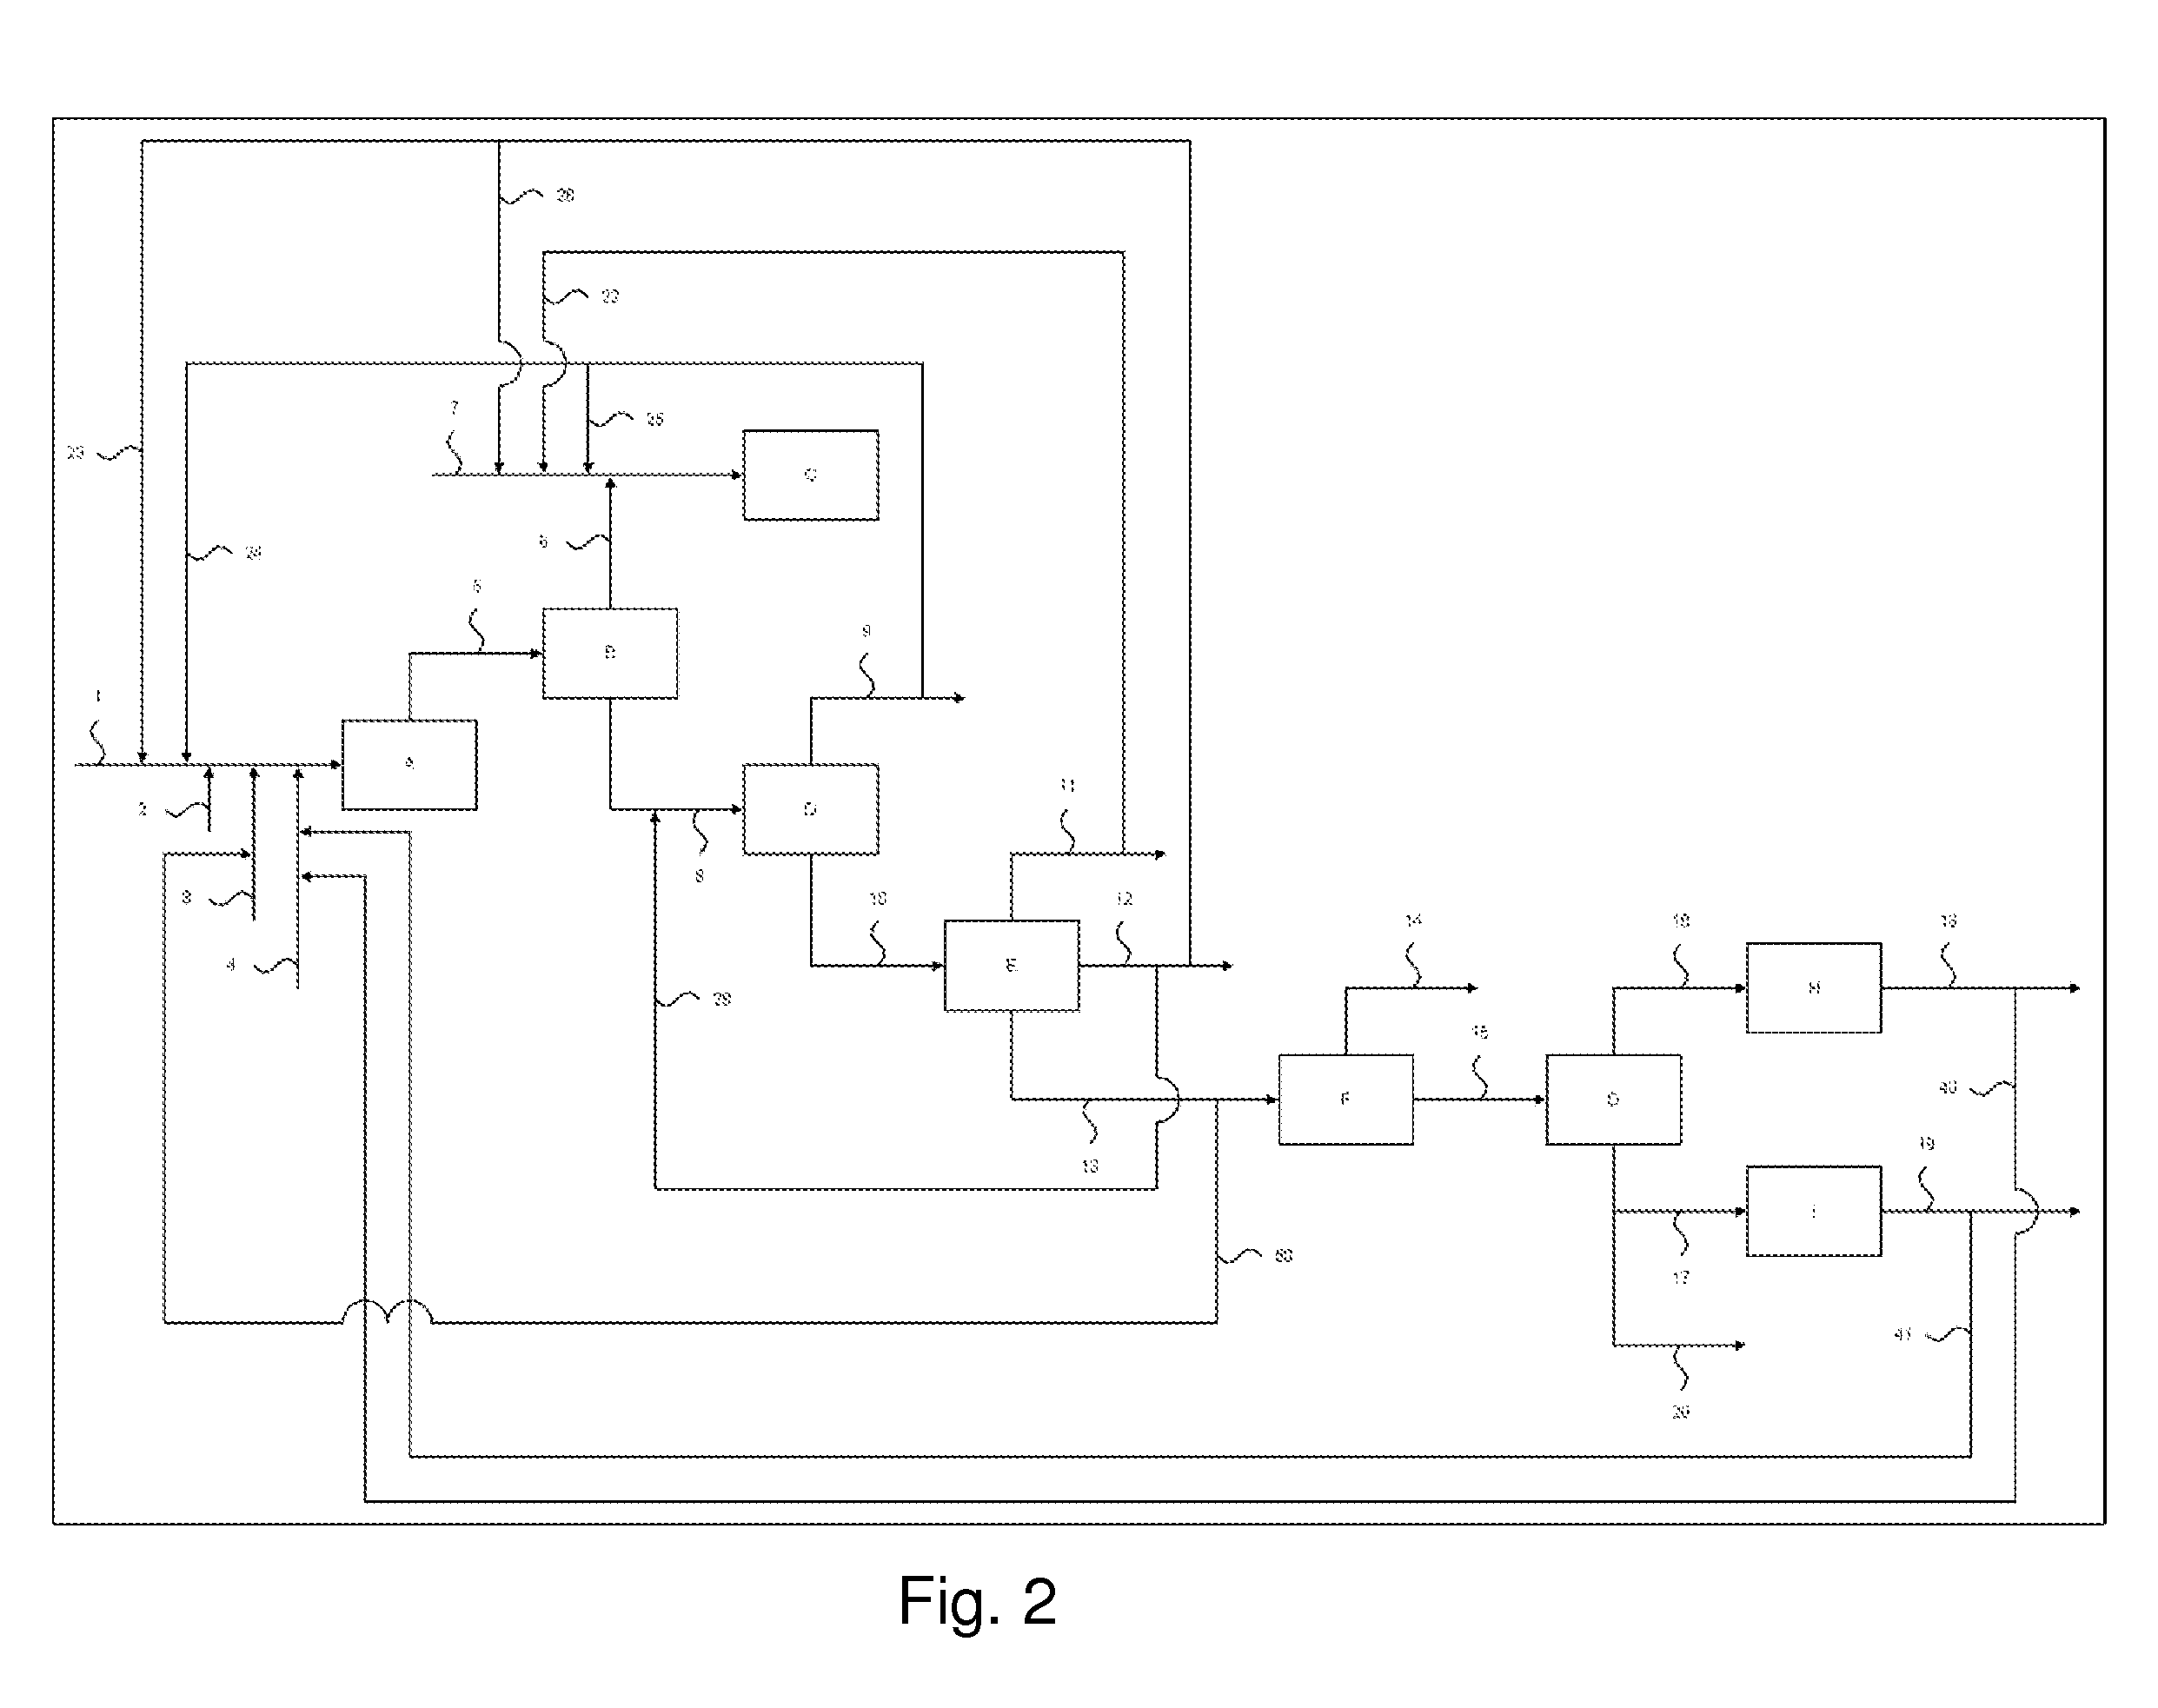 Process for hydroconversion of petroleum feedstocks via a slurry technology allowing the recovery of metals from the catalyst and from the feedstock using a coking step